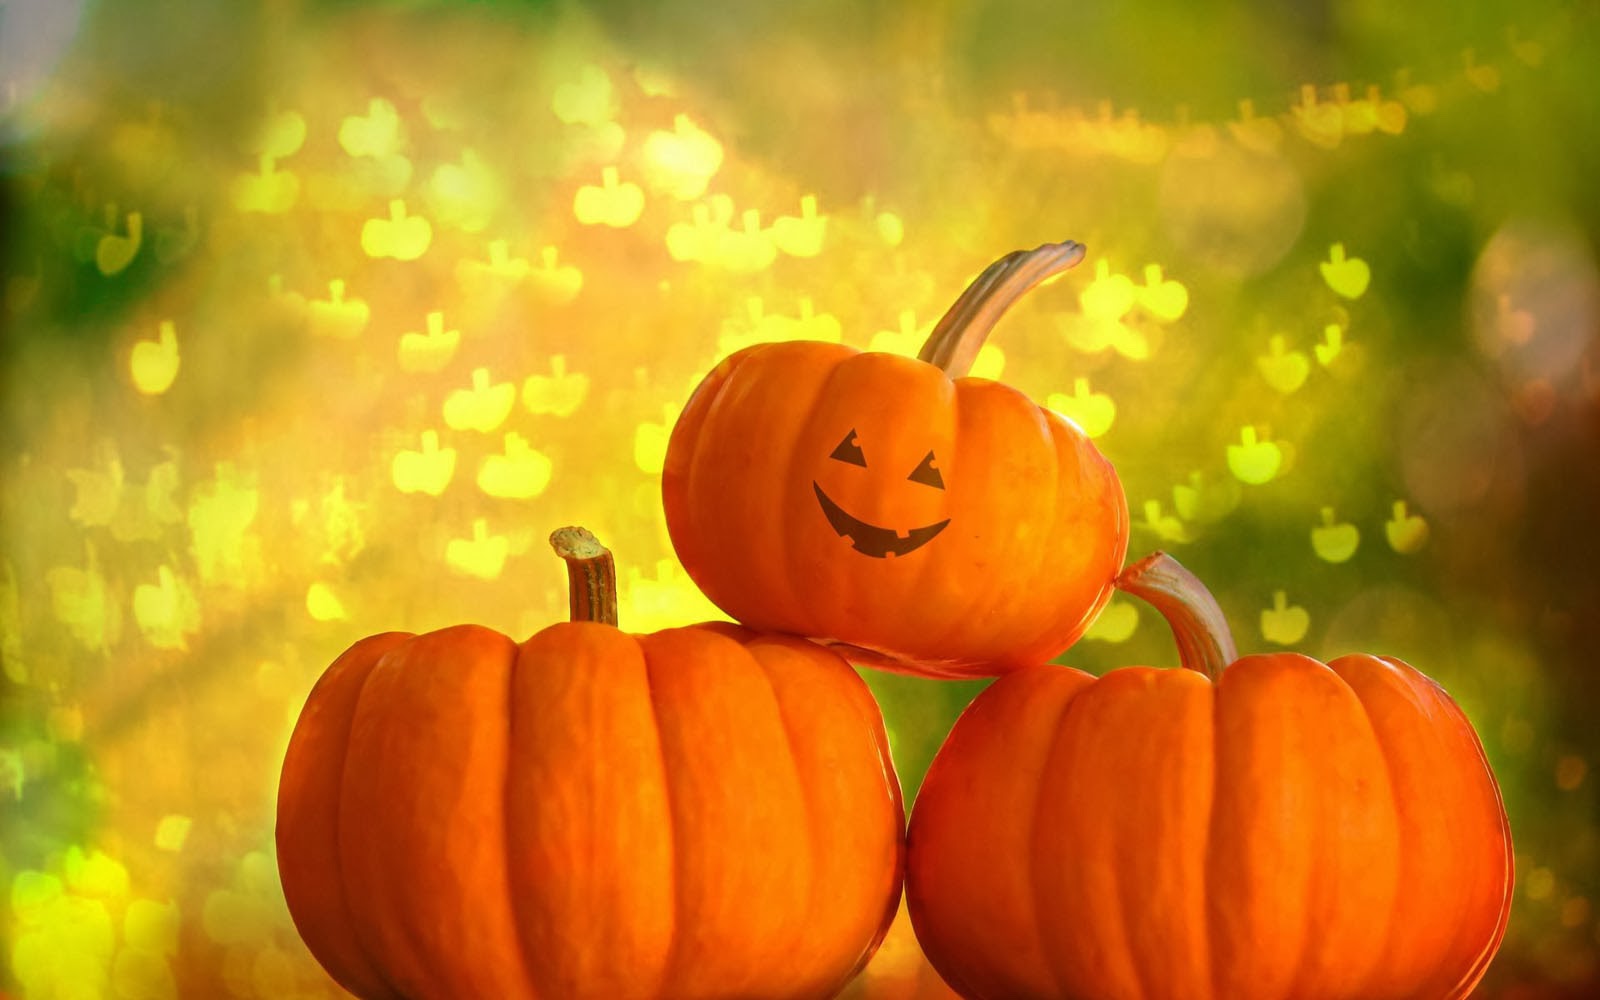 Tag Pumpkin Wallpaper Background Photos Image Andpictures For